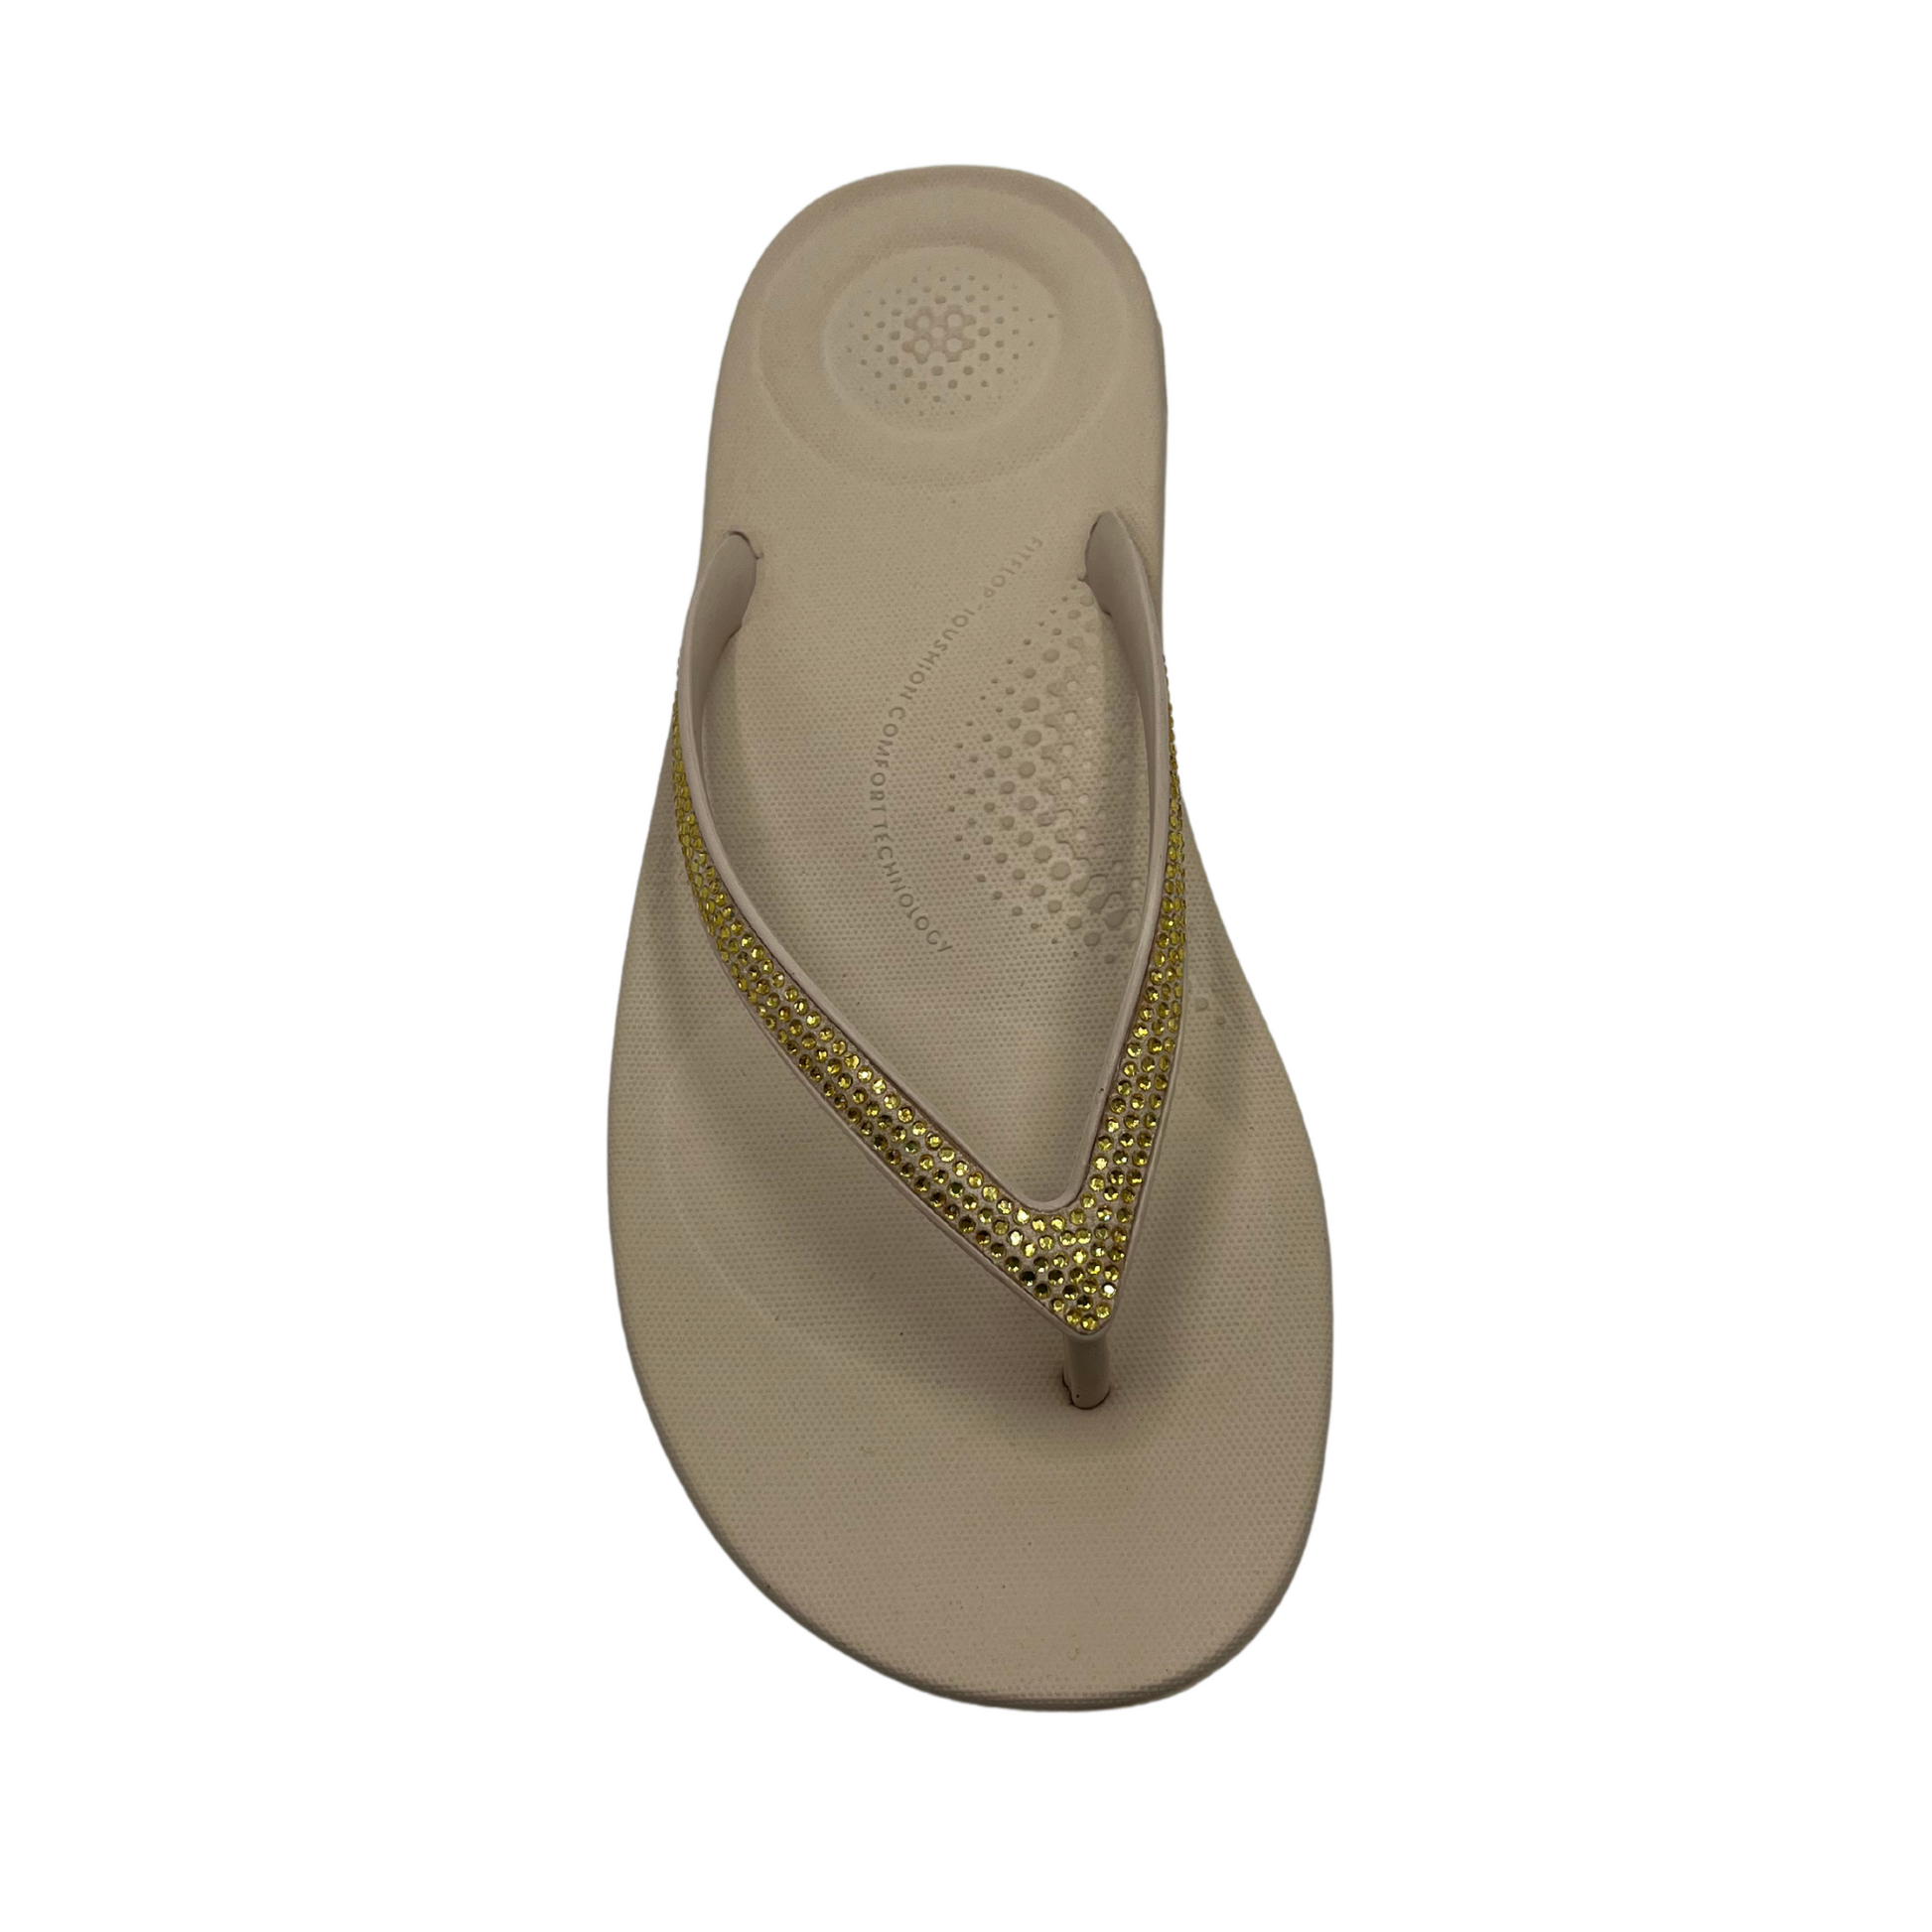 Top view of beige flip flop with bejewelled thong strap